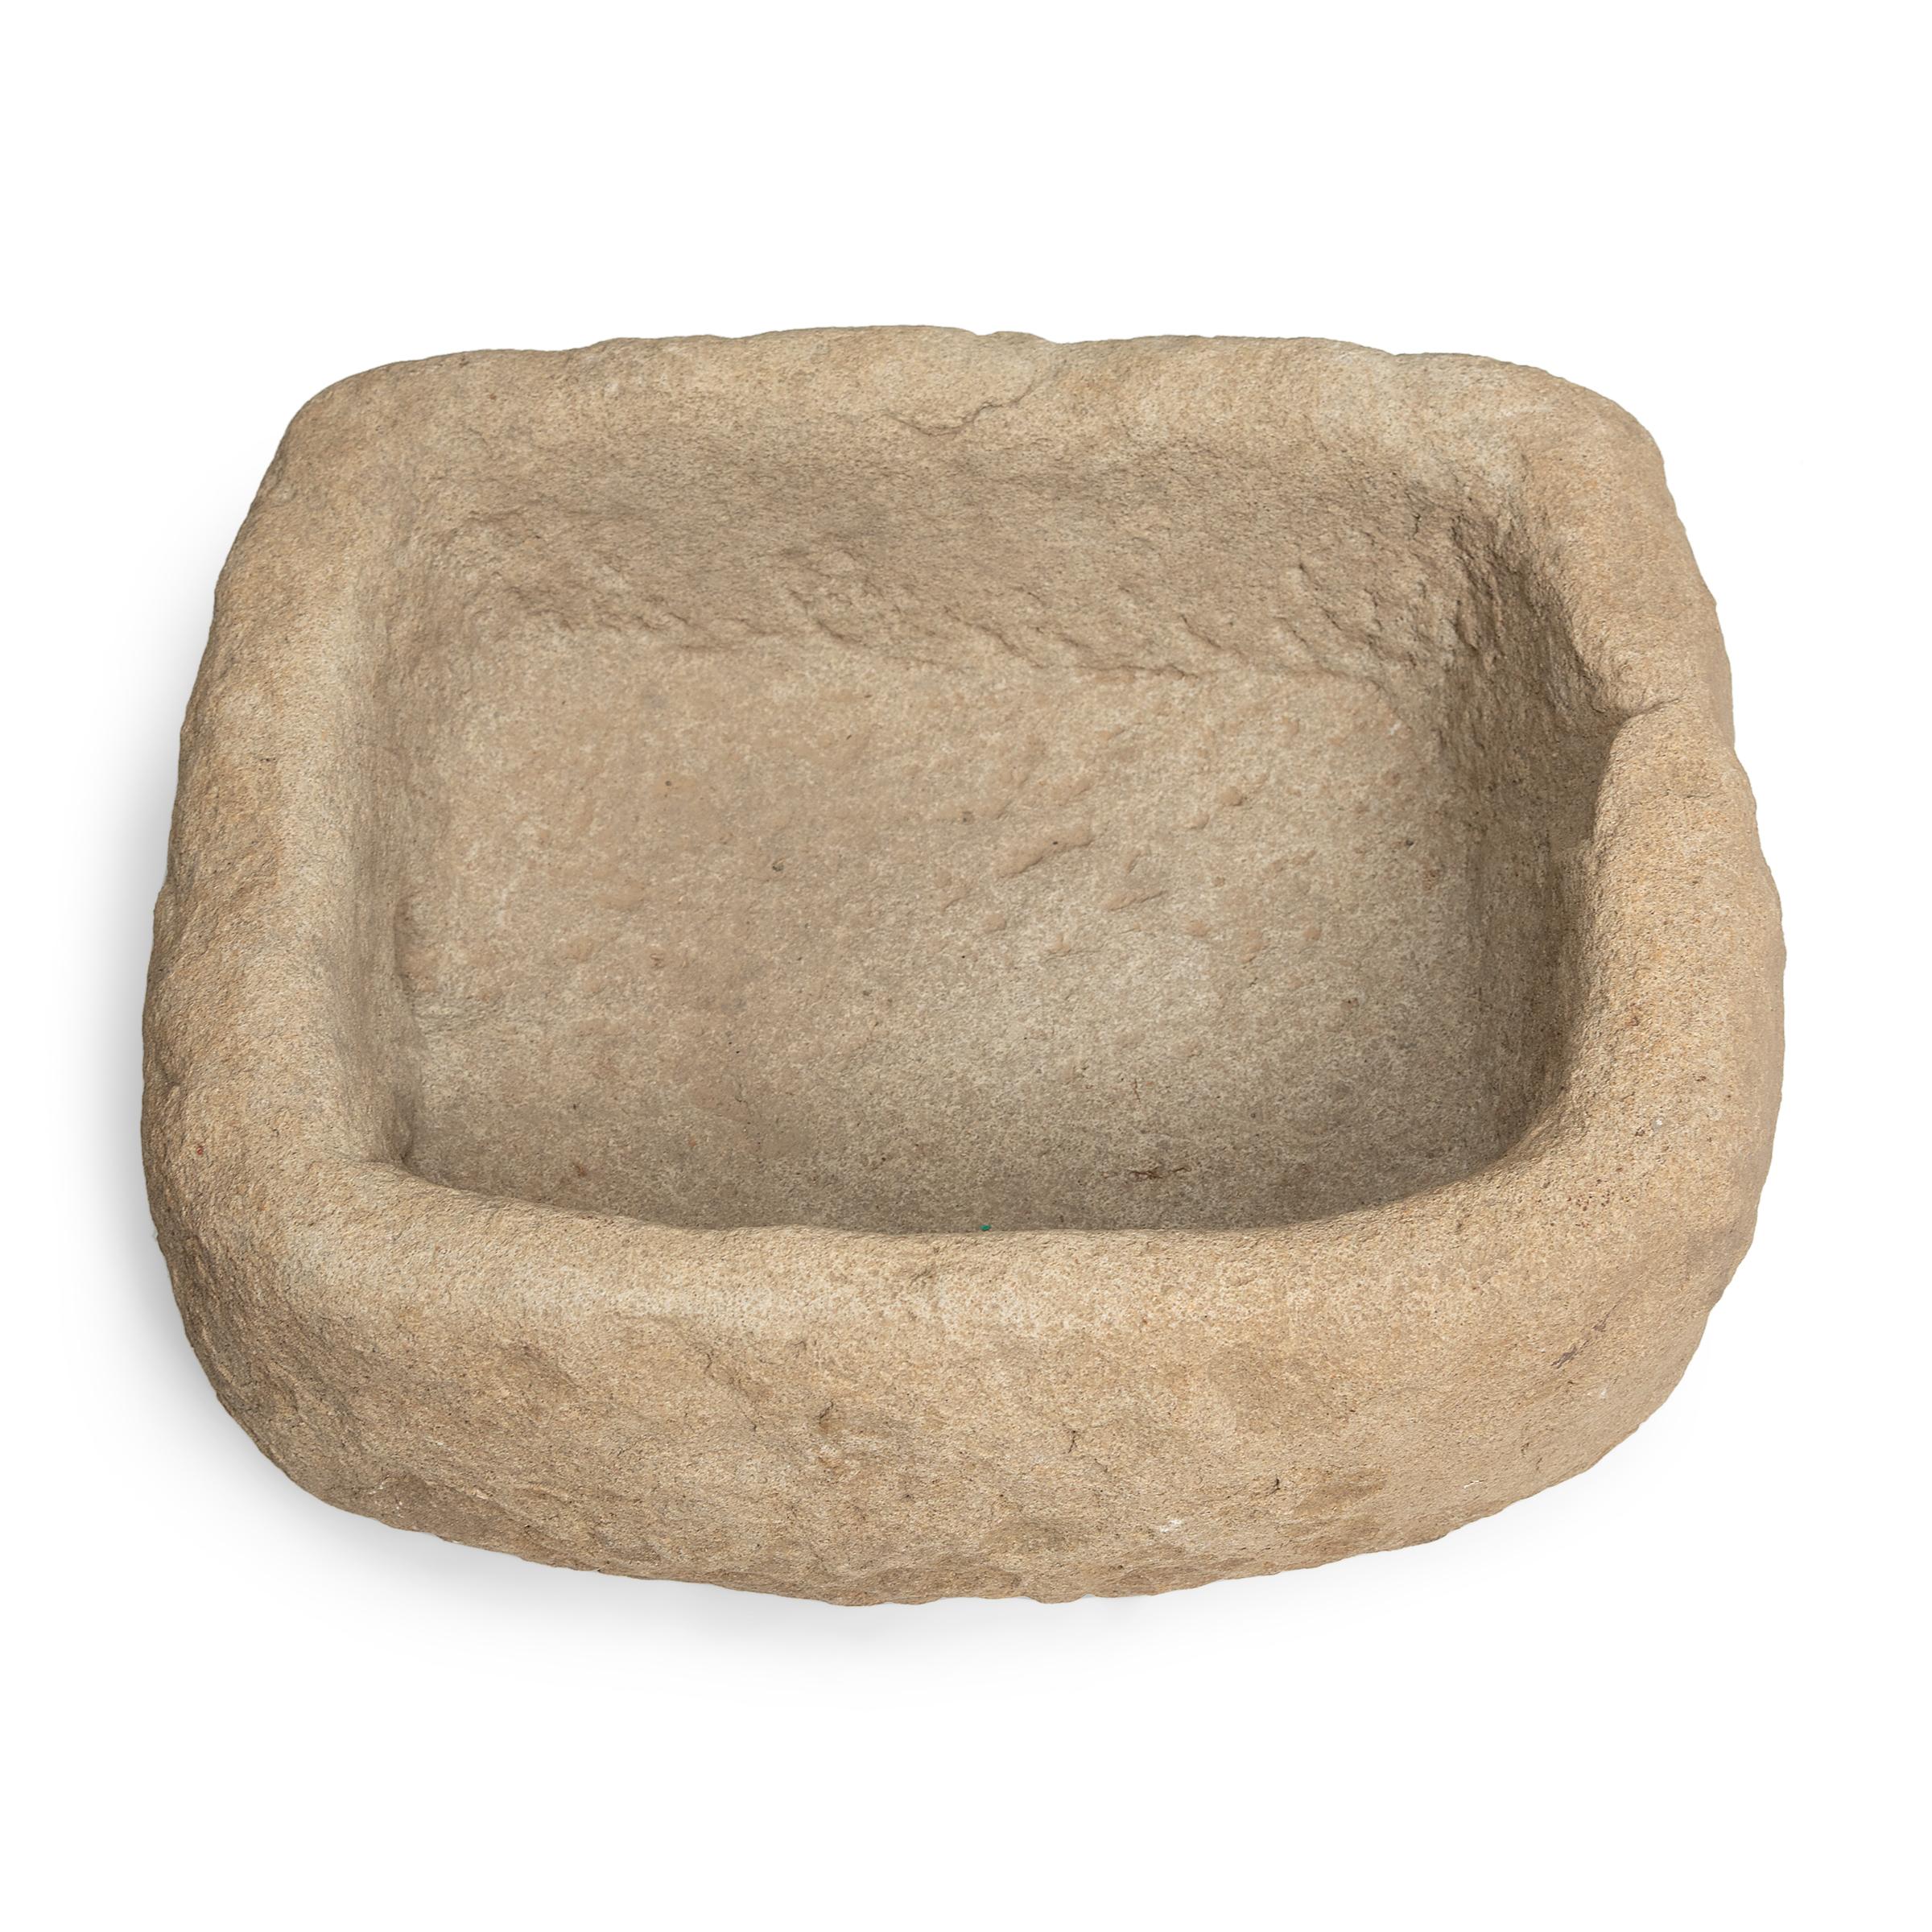 Once used on a provincial Chinese farm to hold water or animal feed, this early 20th-century stone trough is celebrated today for its organic form and rustic authenticity. Hand-carved from solid limestone, this rectangular trough has an asymmetrical